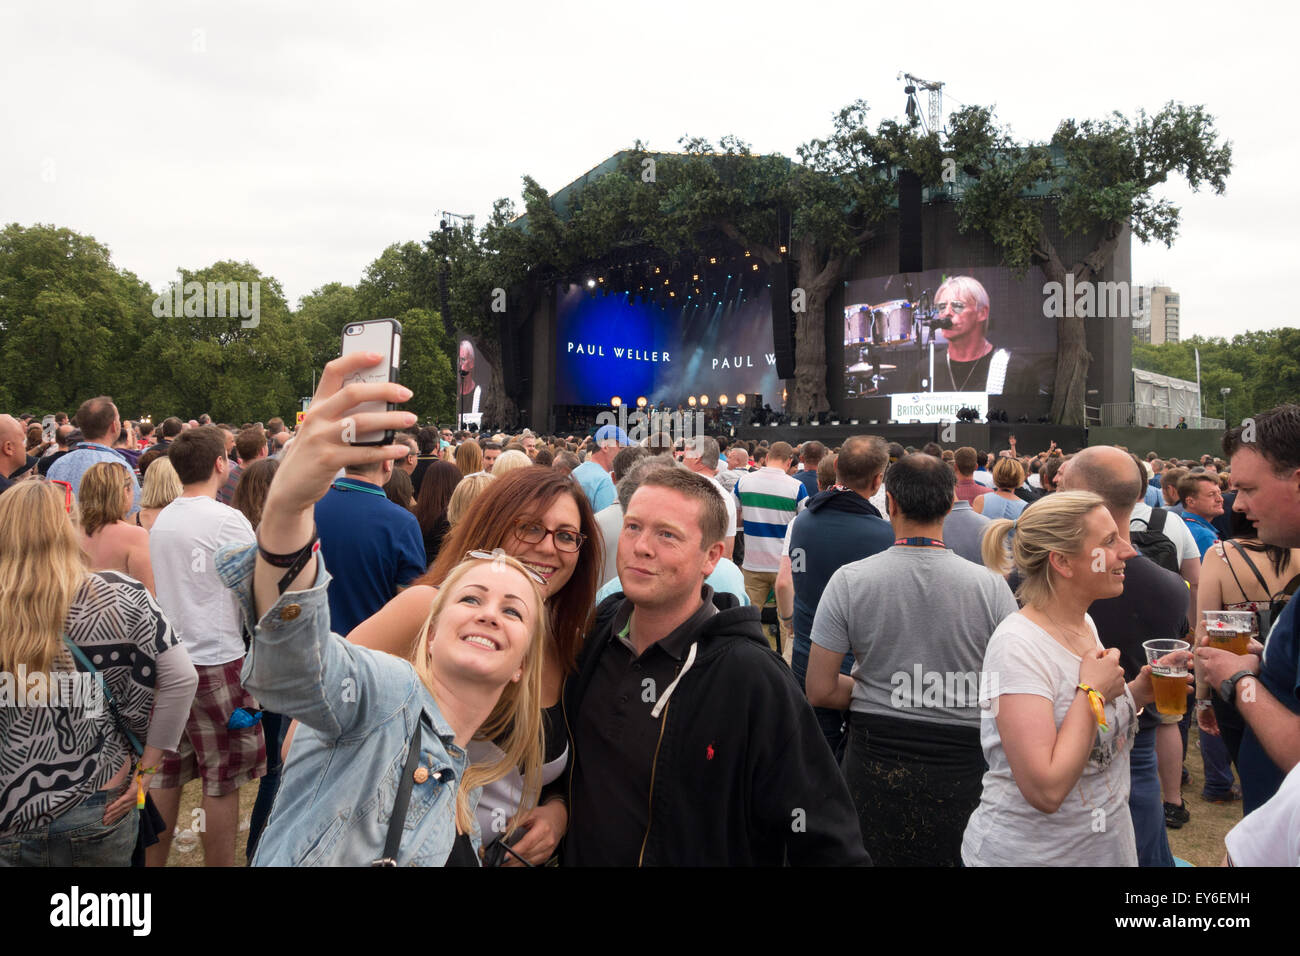 People taking a selfie photo at a rock music concert, British Summer Time Hyde Park, London UK Stock Photo